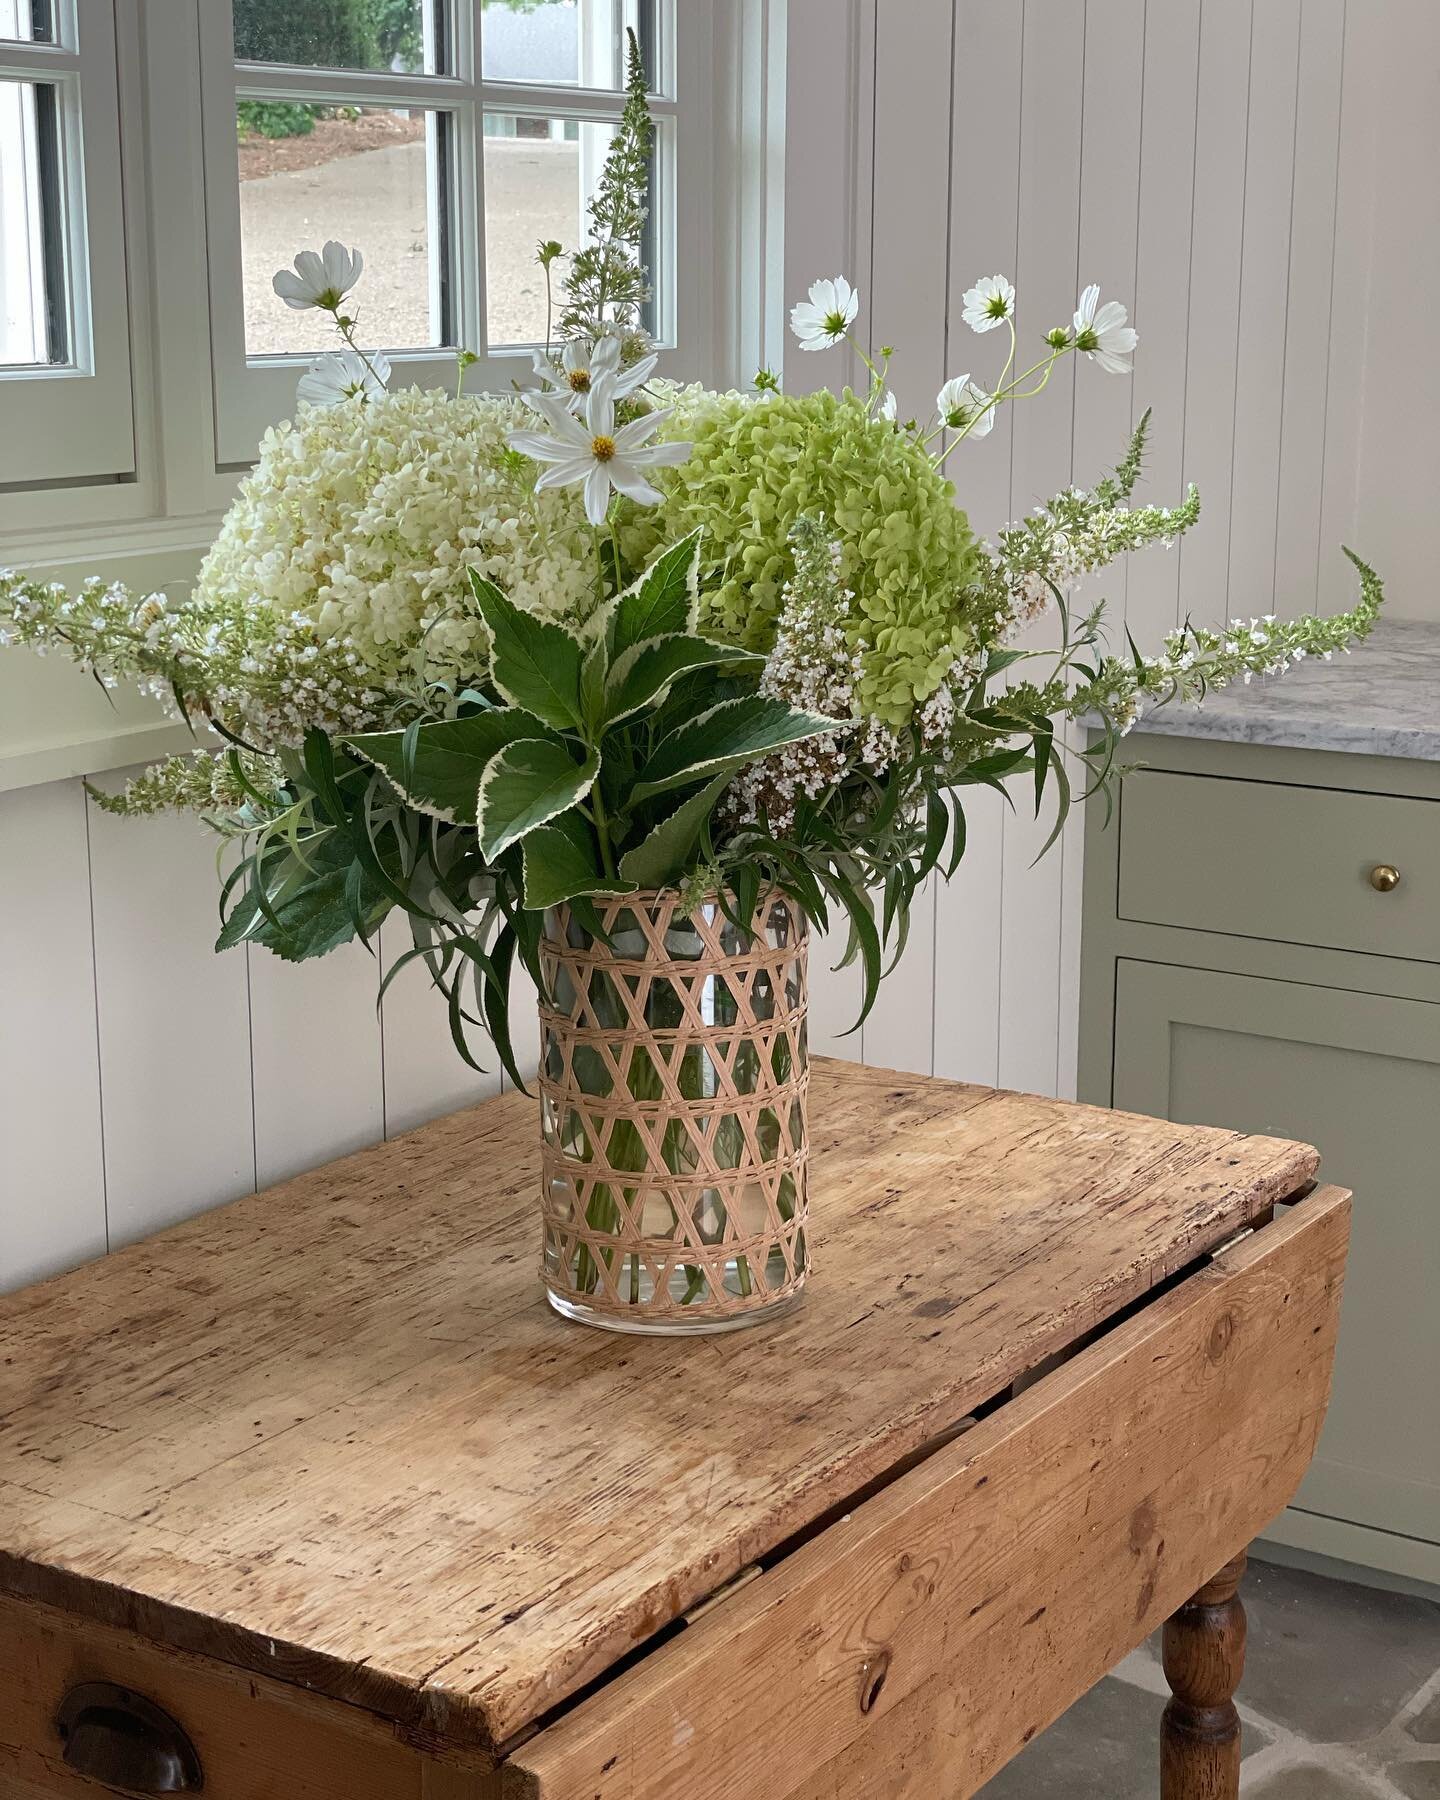 In the Kitchen 

Gathered some flowers to bring a little happy to the kitchen.

Happy Monday to You 🤍
.
.
.
.
#figdesigncompany 
#ourboxwoodcottage 
#kitchendesign 
#kitchen
#kitchens 
#kitcheninspo 
#kitchendesign 
#kitchenstyle 
#cottagekitchen
#e